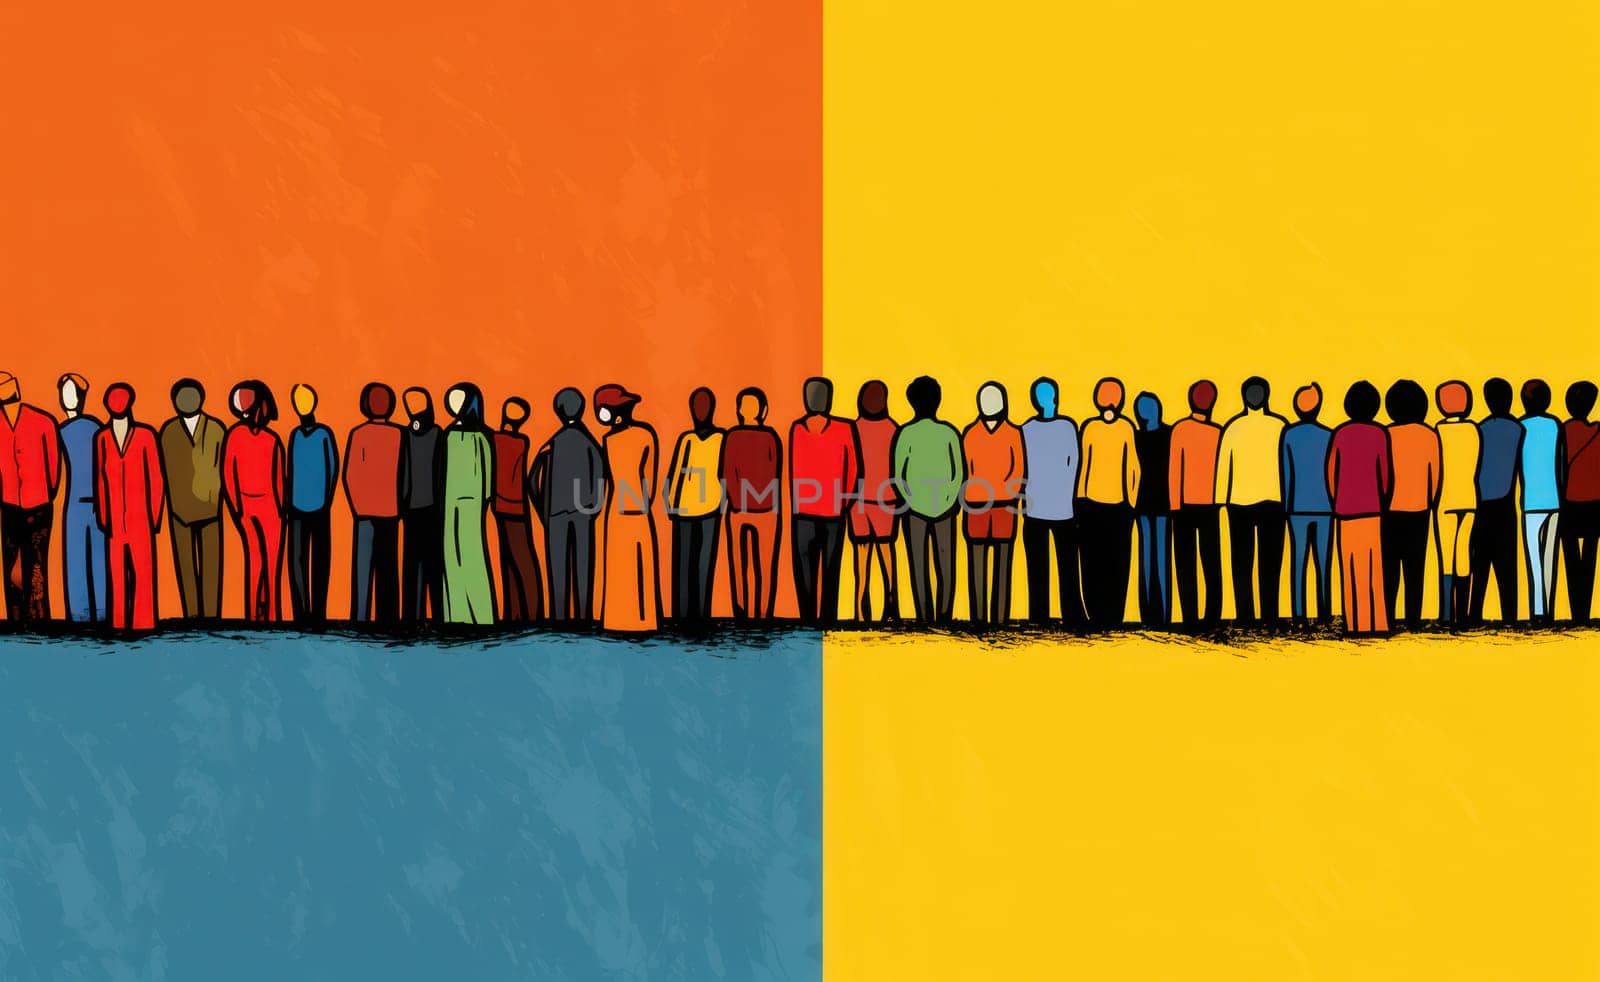 United in Diversity: A Colorful Illustration of a Social Group Standing Together in Unity and Cooperation by Vichizh